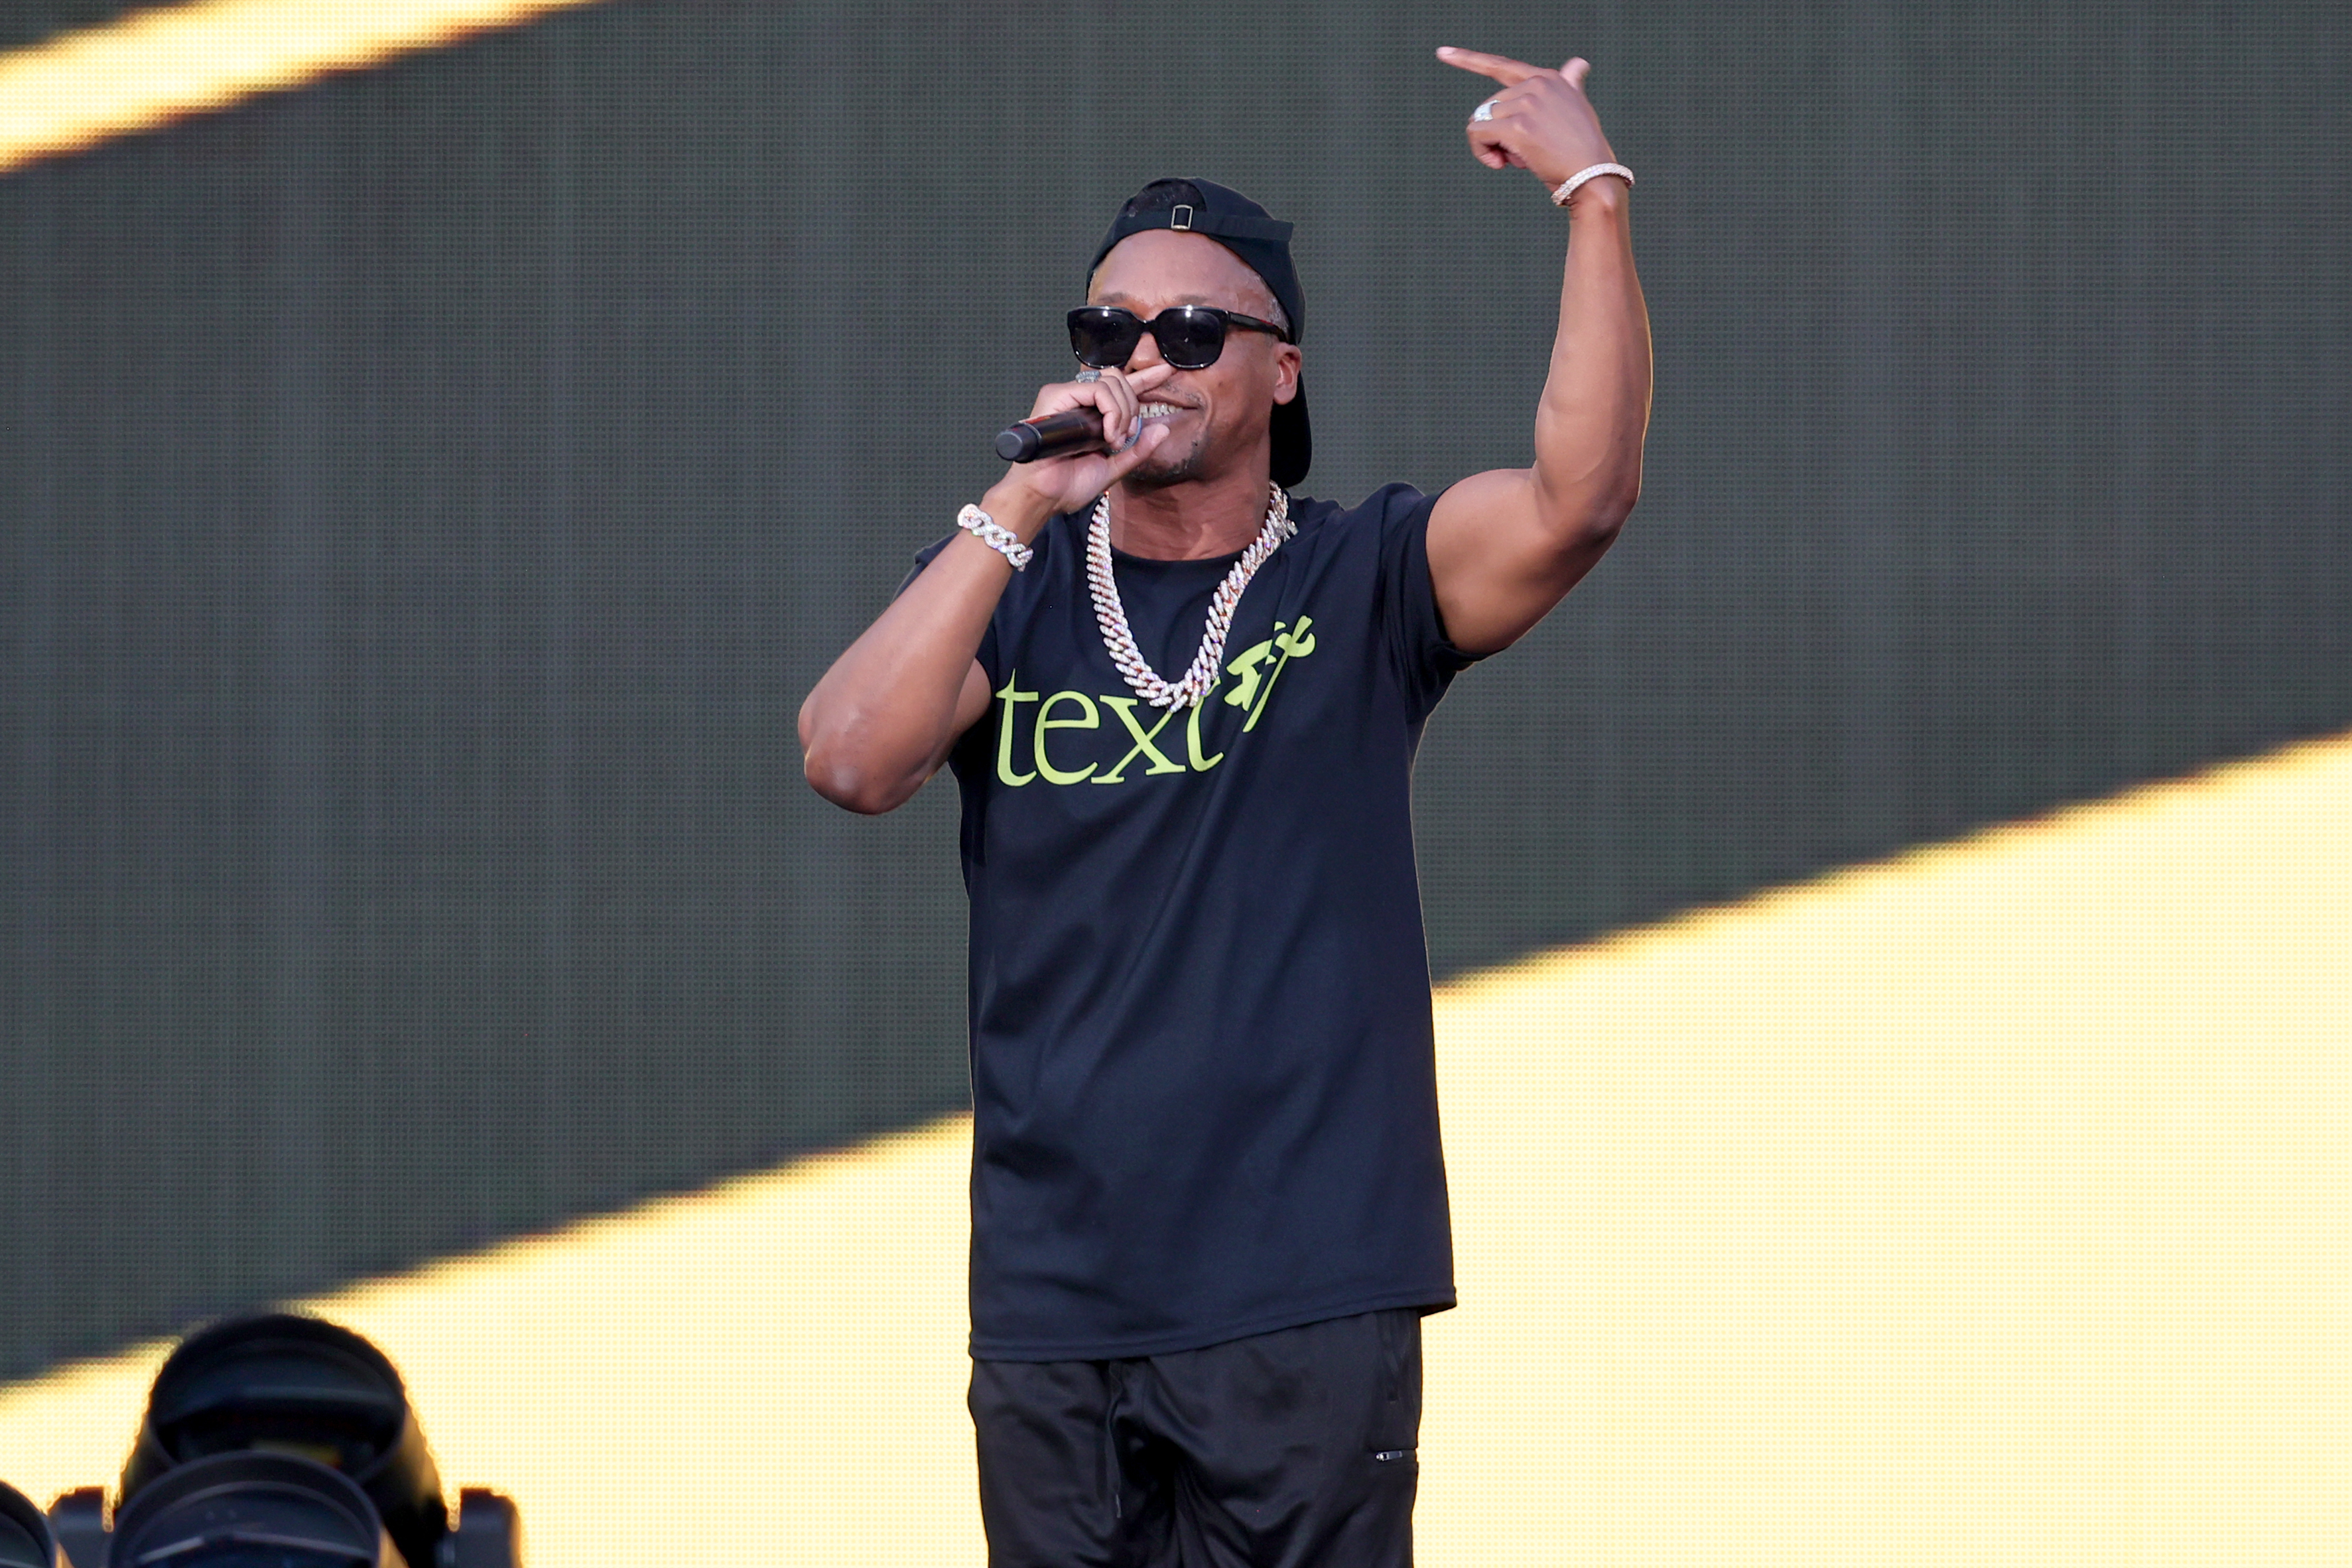 Music artist performing on stage with microphone, wearing casual attire and sunglasses